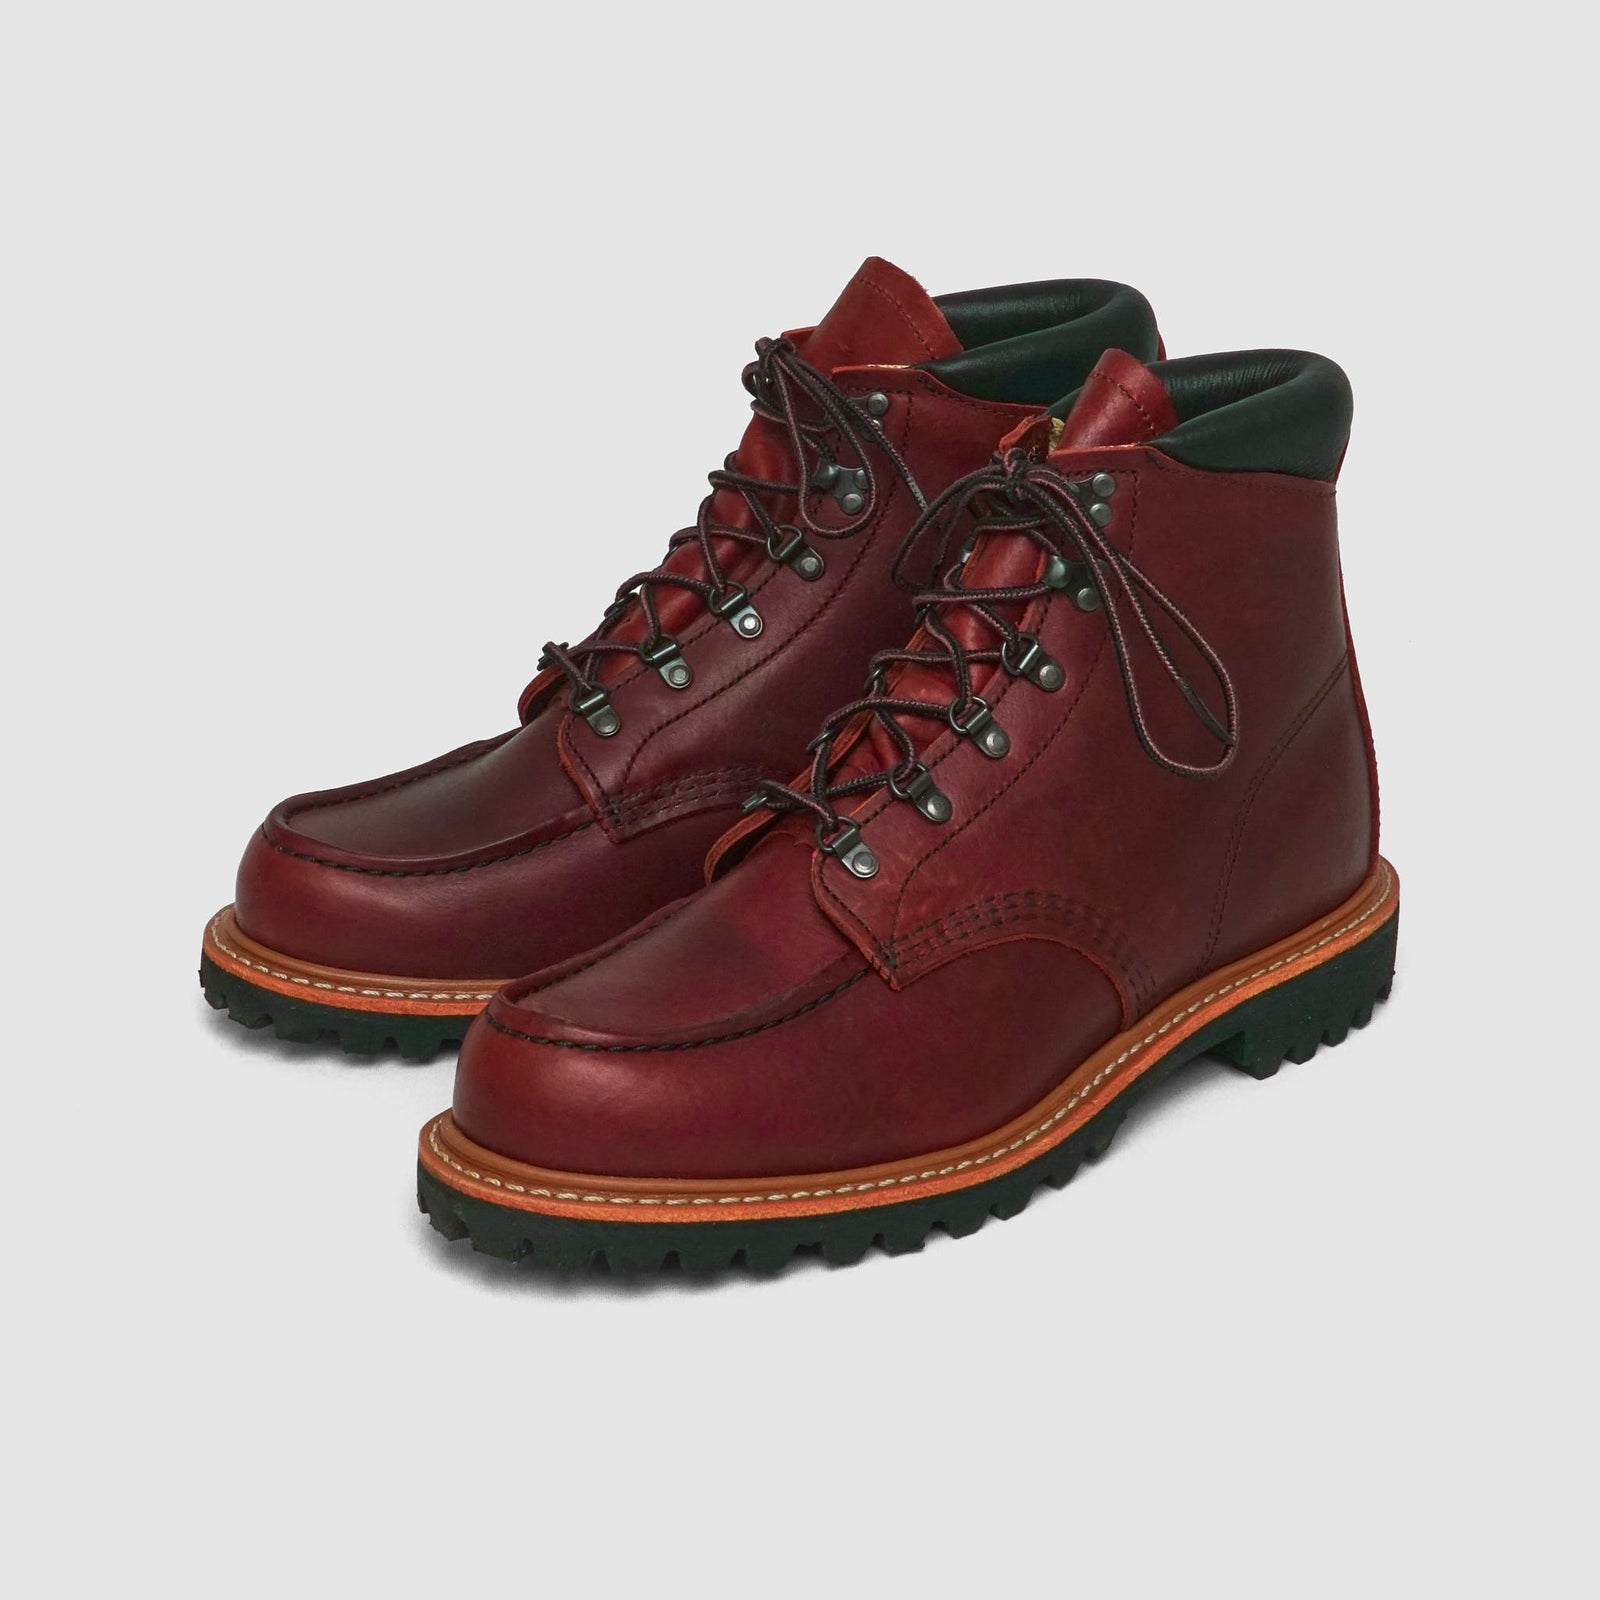 Red Wing Shoes - DeeCee style